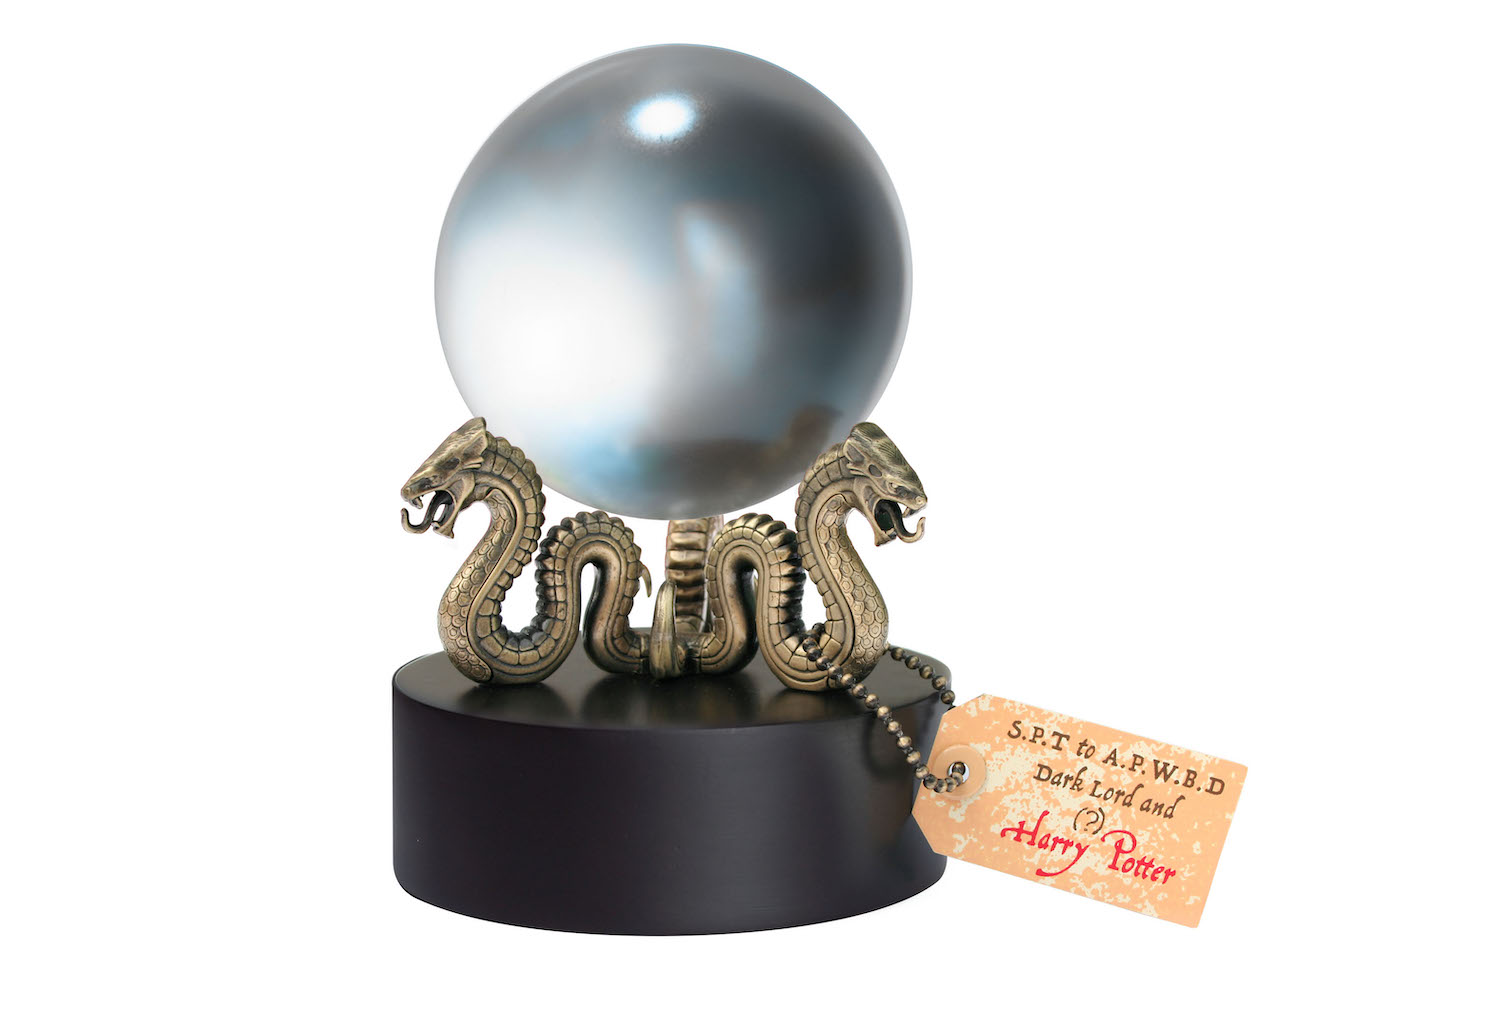 The Noble Collection’s Prophecy Orb is an authentic replica of the prophecy concerning Lord Voldemort and Harry Potter.